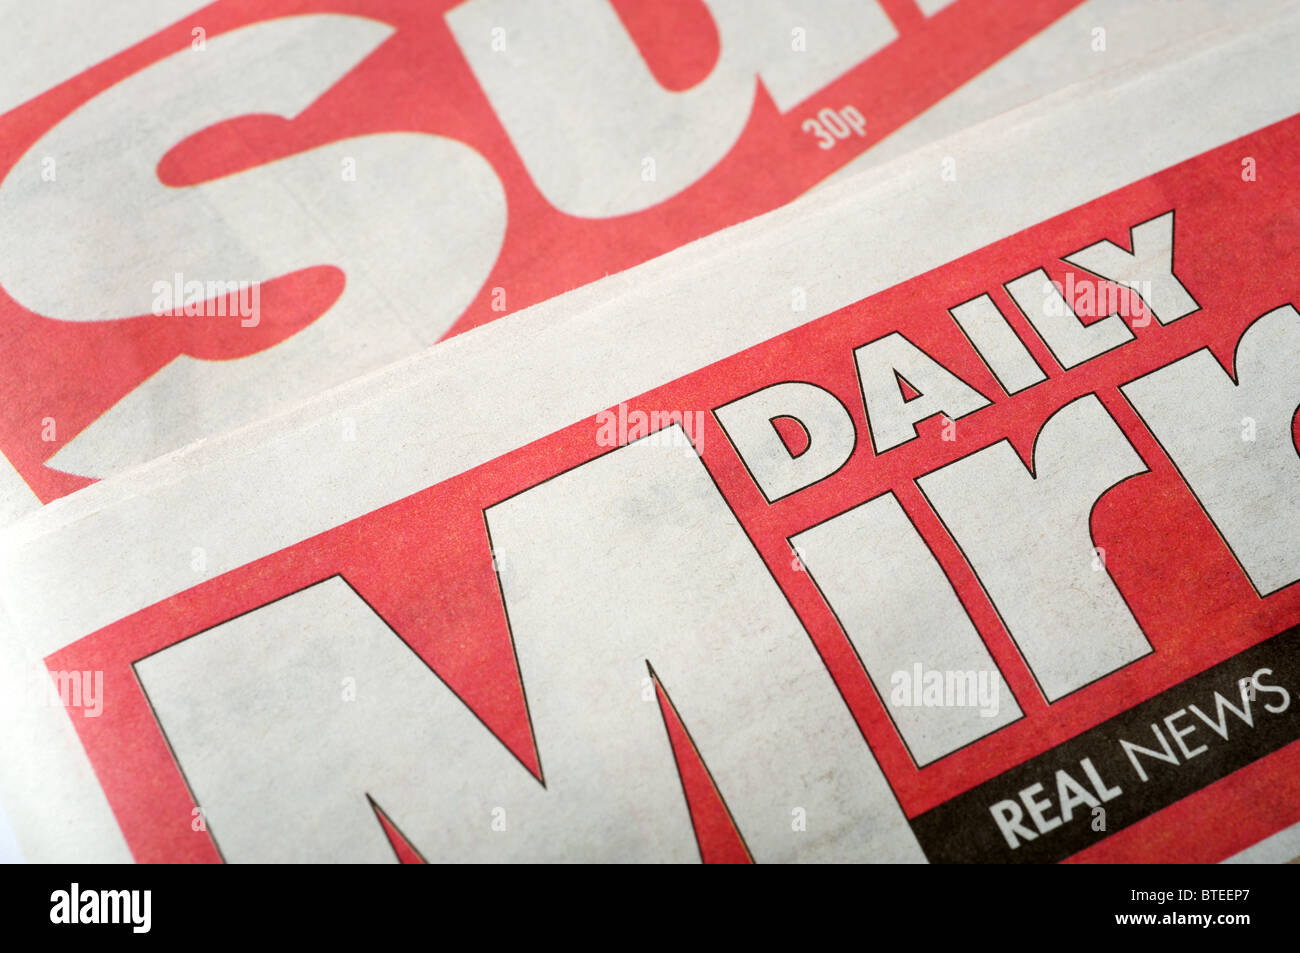 The Sun and Daily Mirror tabloid newspapers Stock Photo